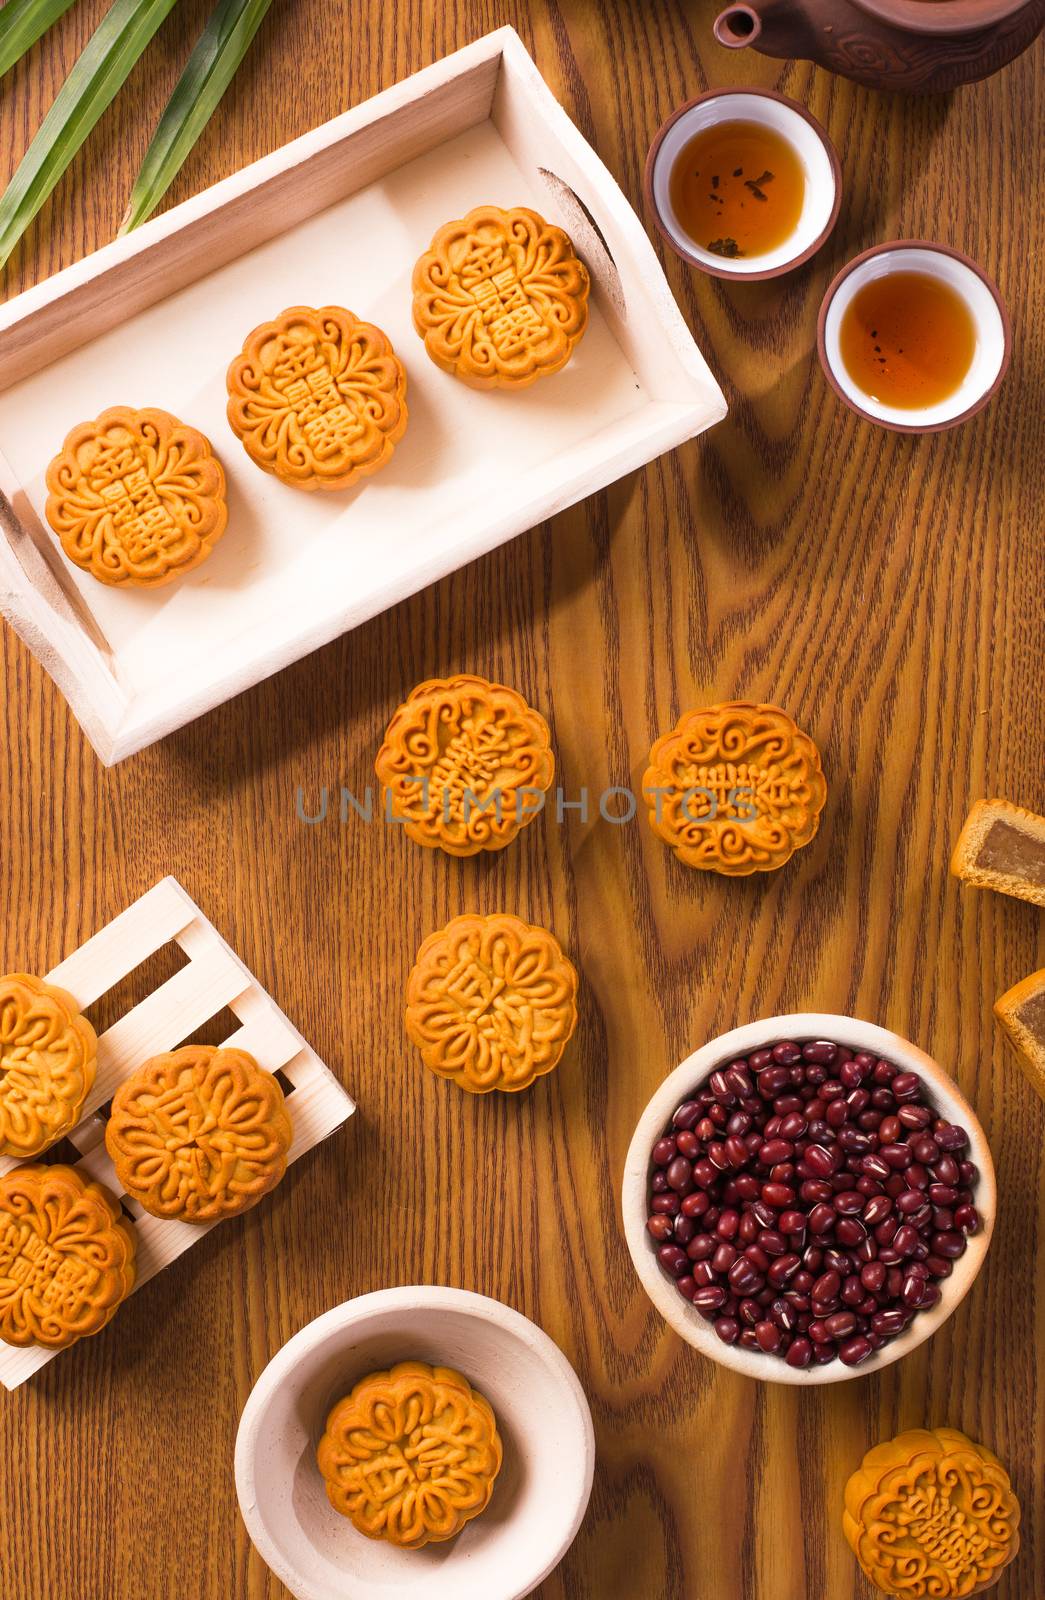  Traditional mooncakes by tehcheesiong